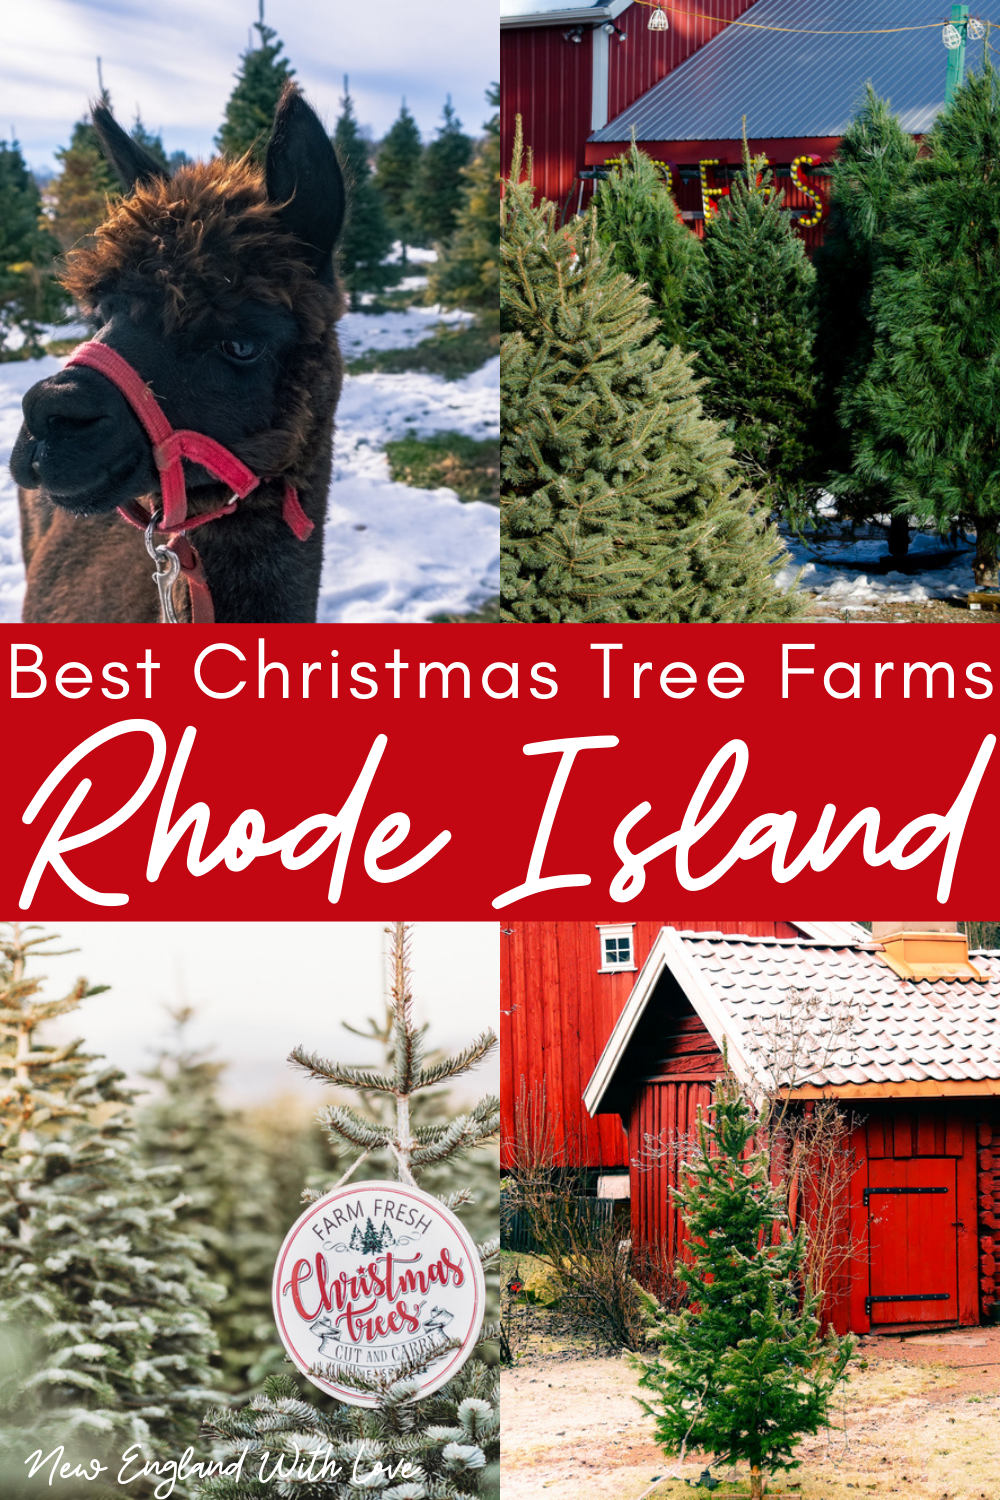 Social image created for Pinterest that says, "Best Christmas Tree Farms in Rhode Island."